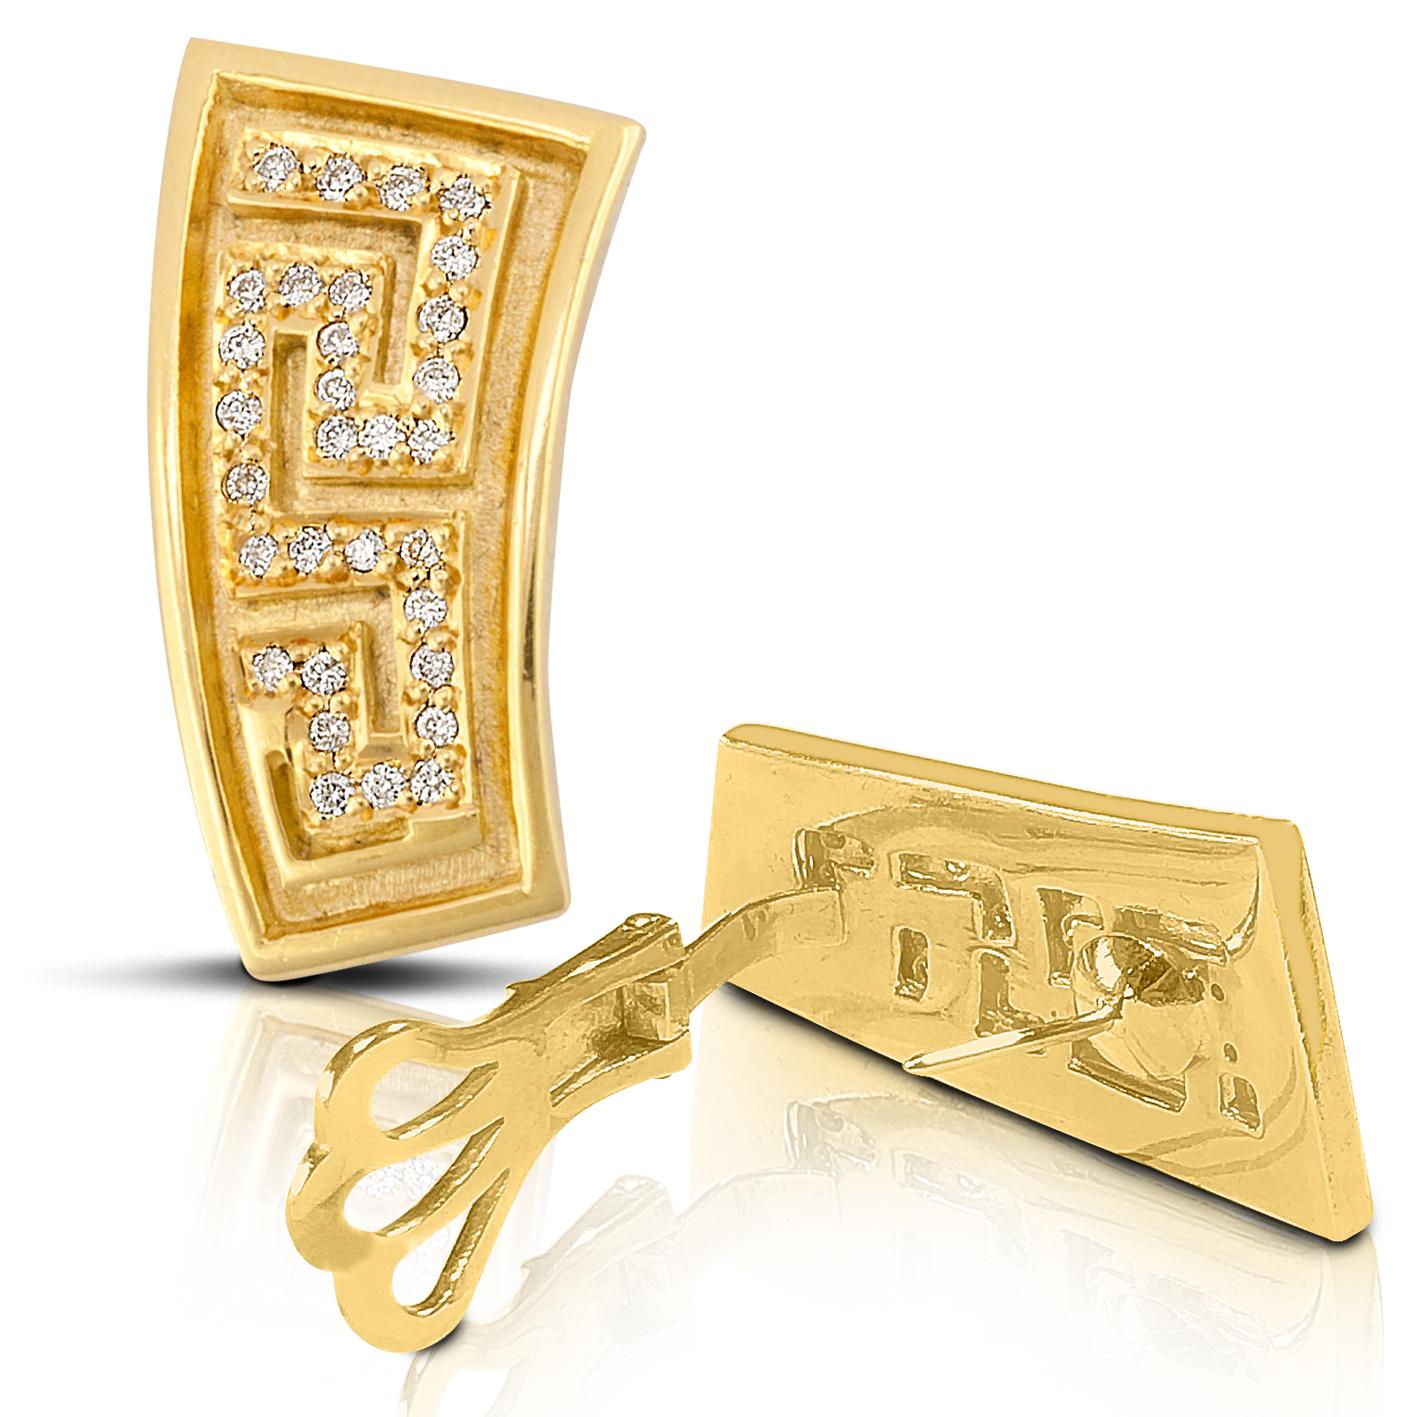 S. Georgios 18 Karat Yellow Gold Hand Made Diamond Earrings with the Greek Key design all custom-made that symbolizes eternity. It is known as the symbol of long life and is one of the most classic designs in the world.
The stunning earrings are